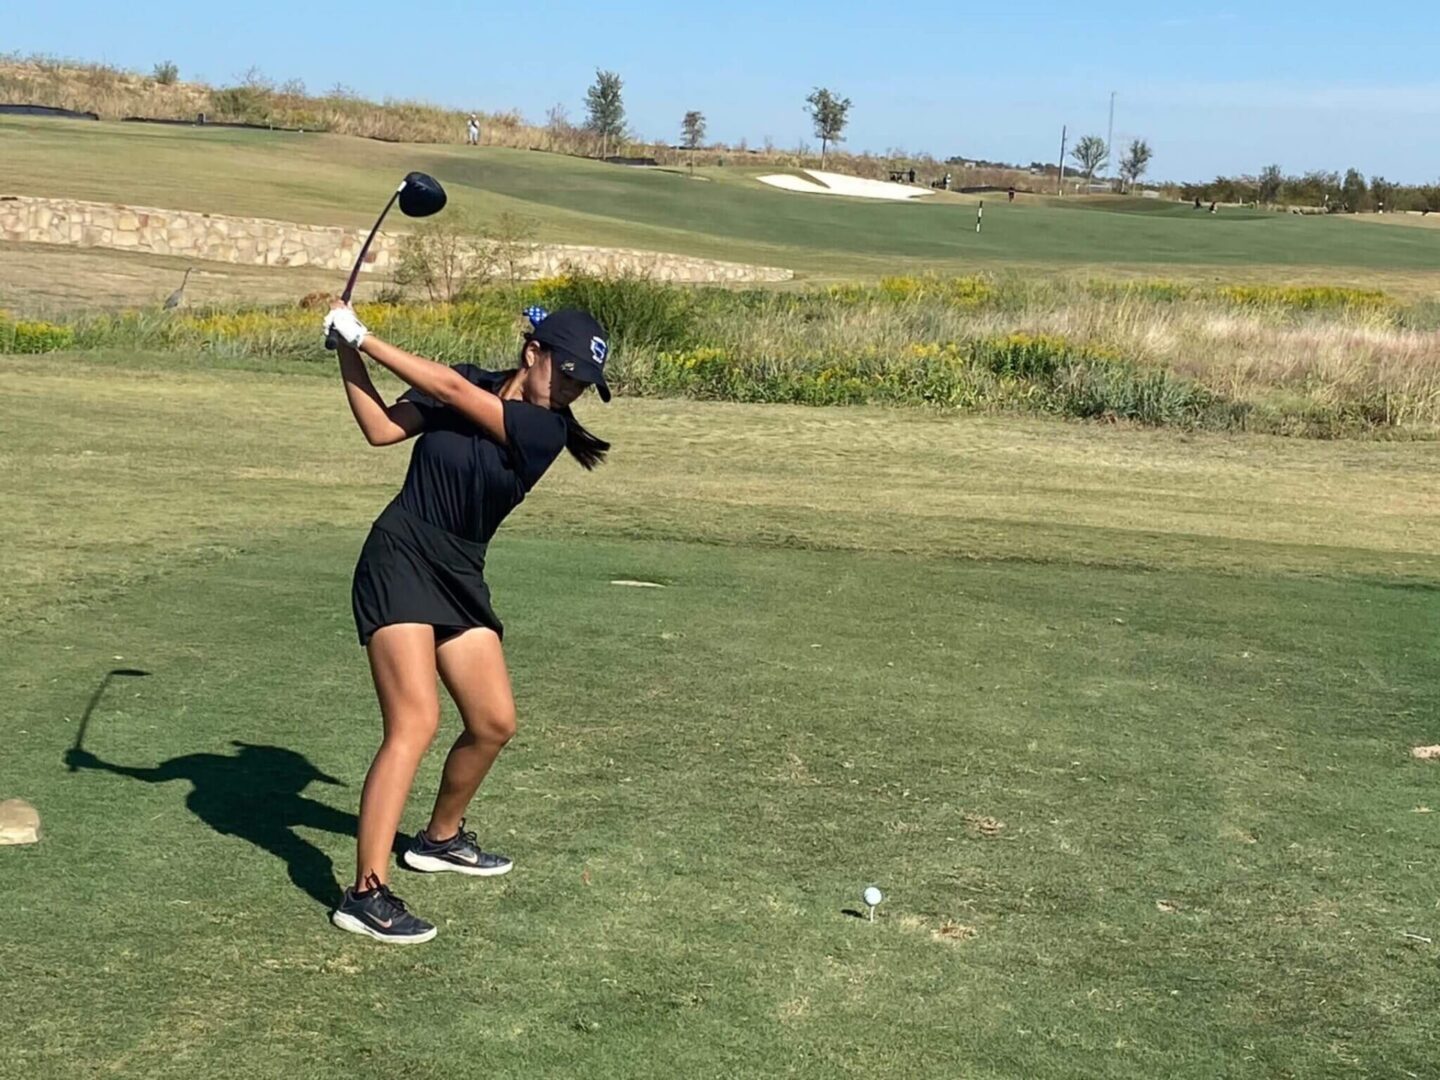 Morgan in a Black Top and Skirt Playing Golf